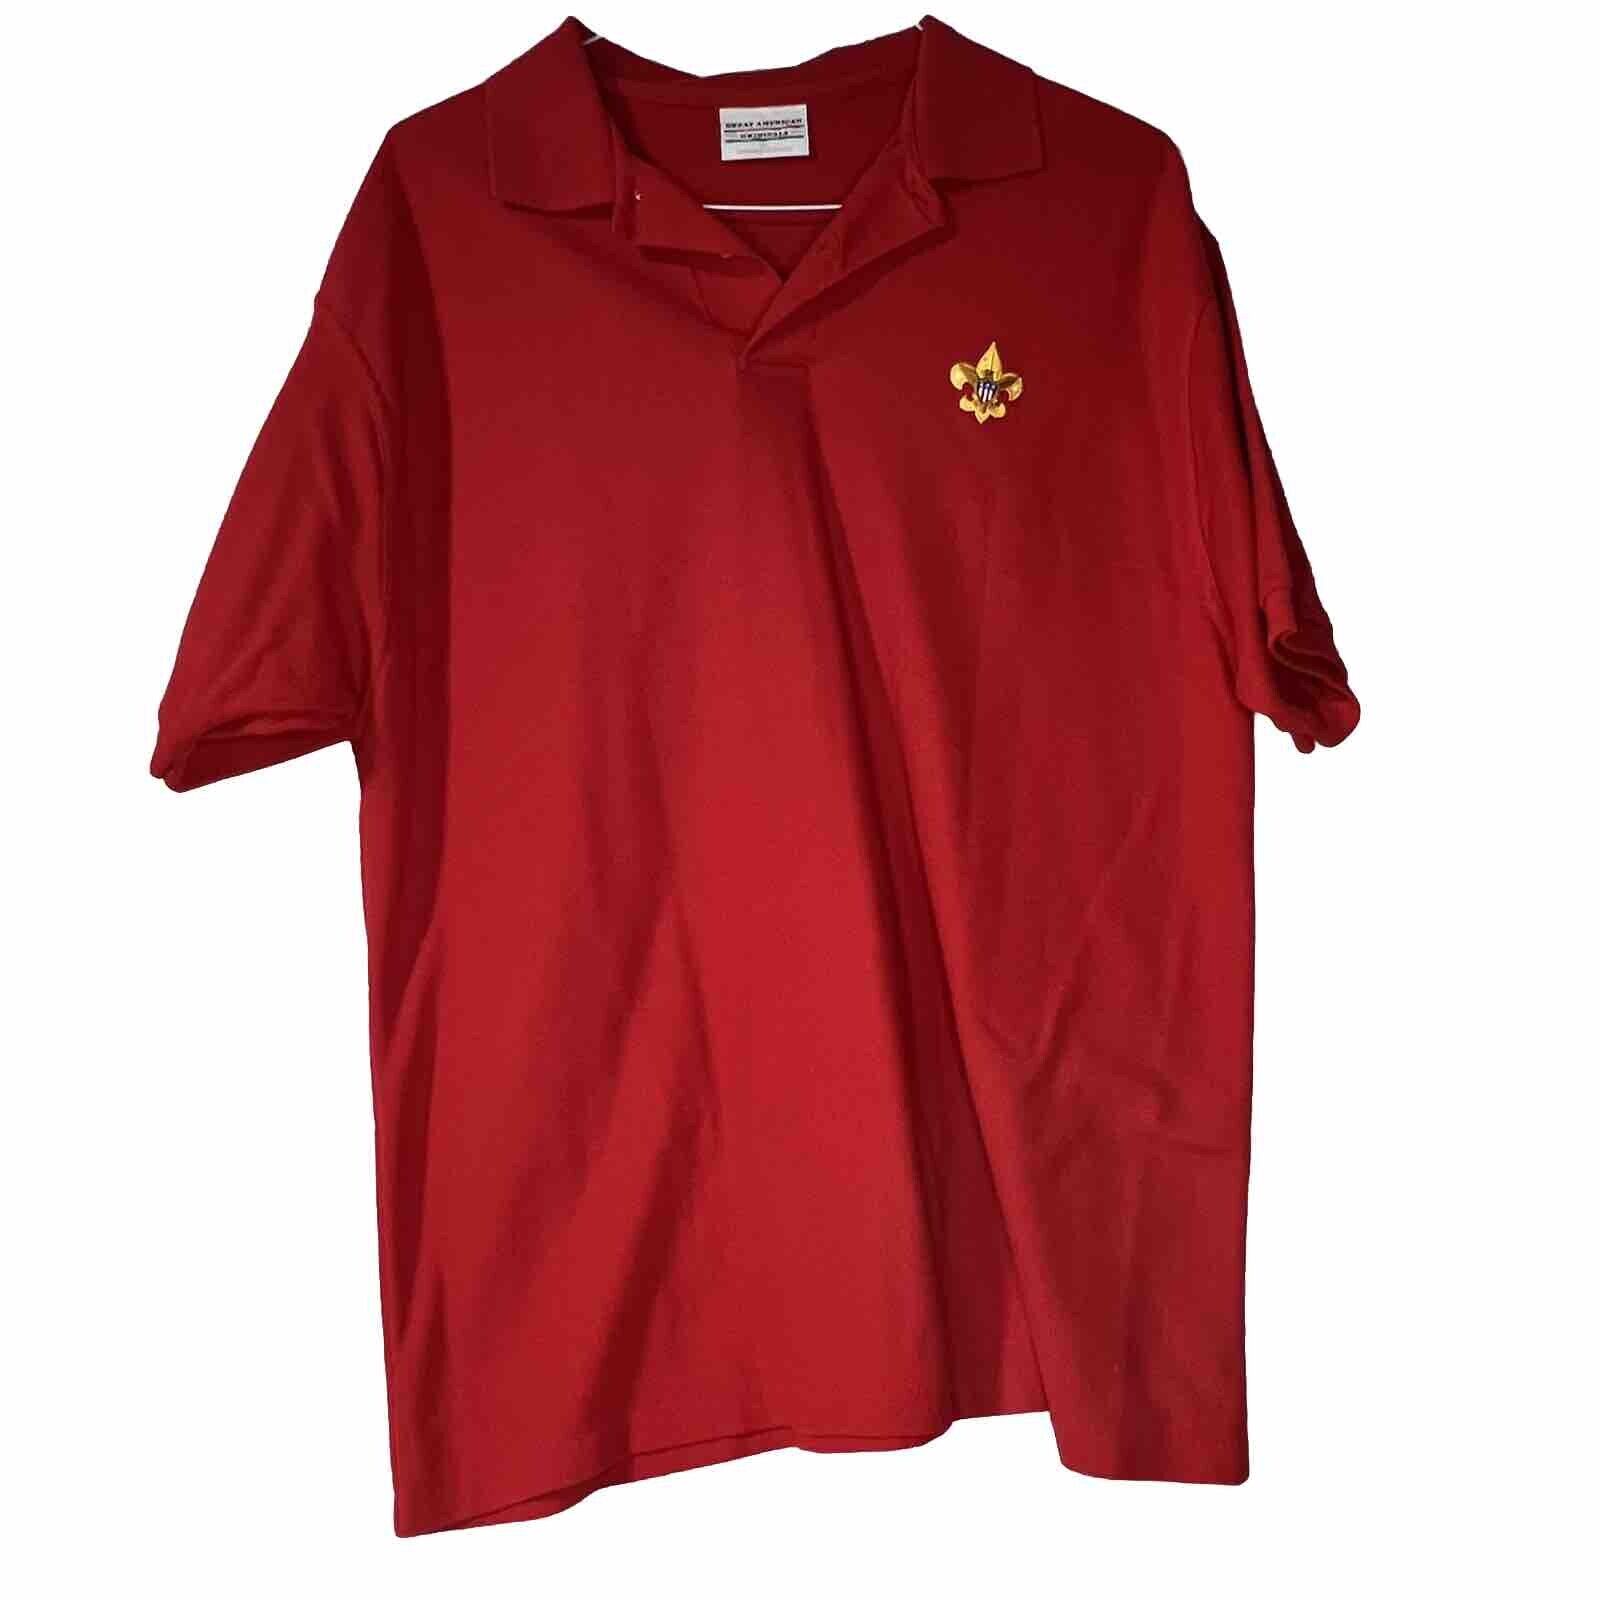 BSA Red Short Sleeve Polo Style 3-Button Shirt w/ FDL Embroidery Adult XL TS-285